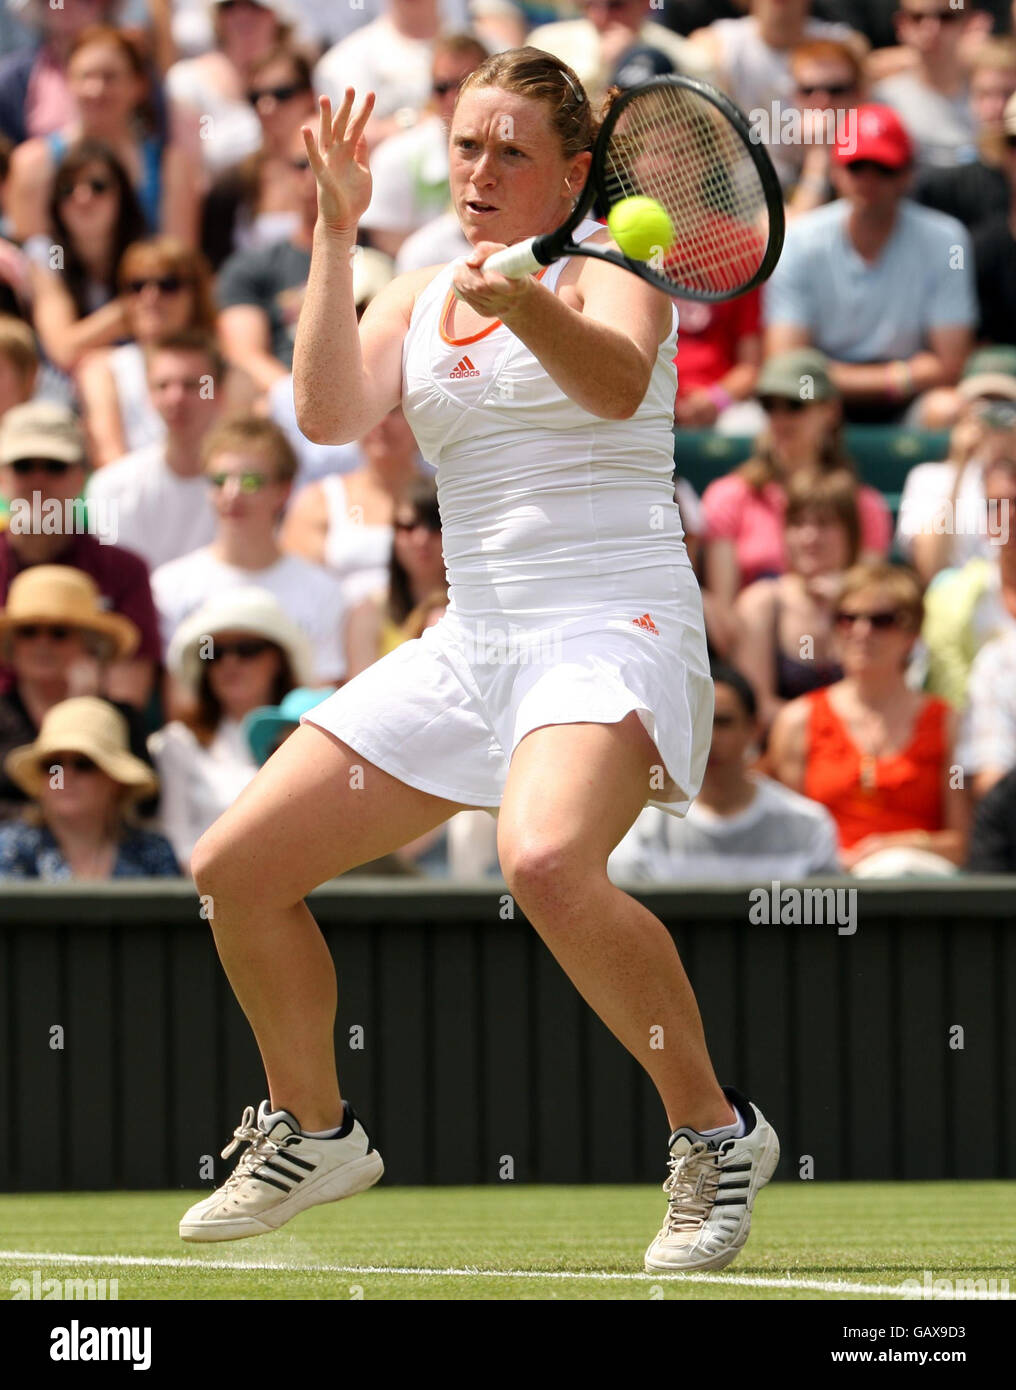 Great Britain's Naomi Cavaday in action during the Wimbledon Championships 2008 at the All England Tennis Club in Wimbledon. Stock Photo